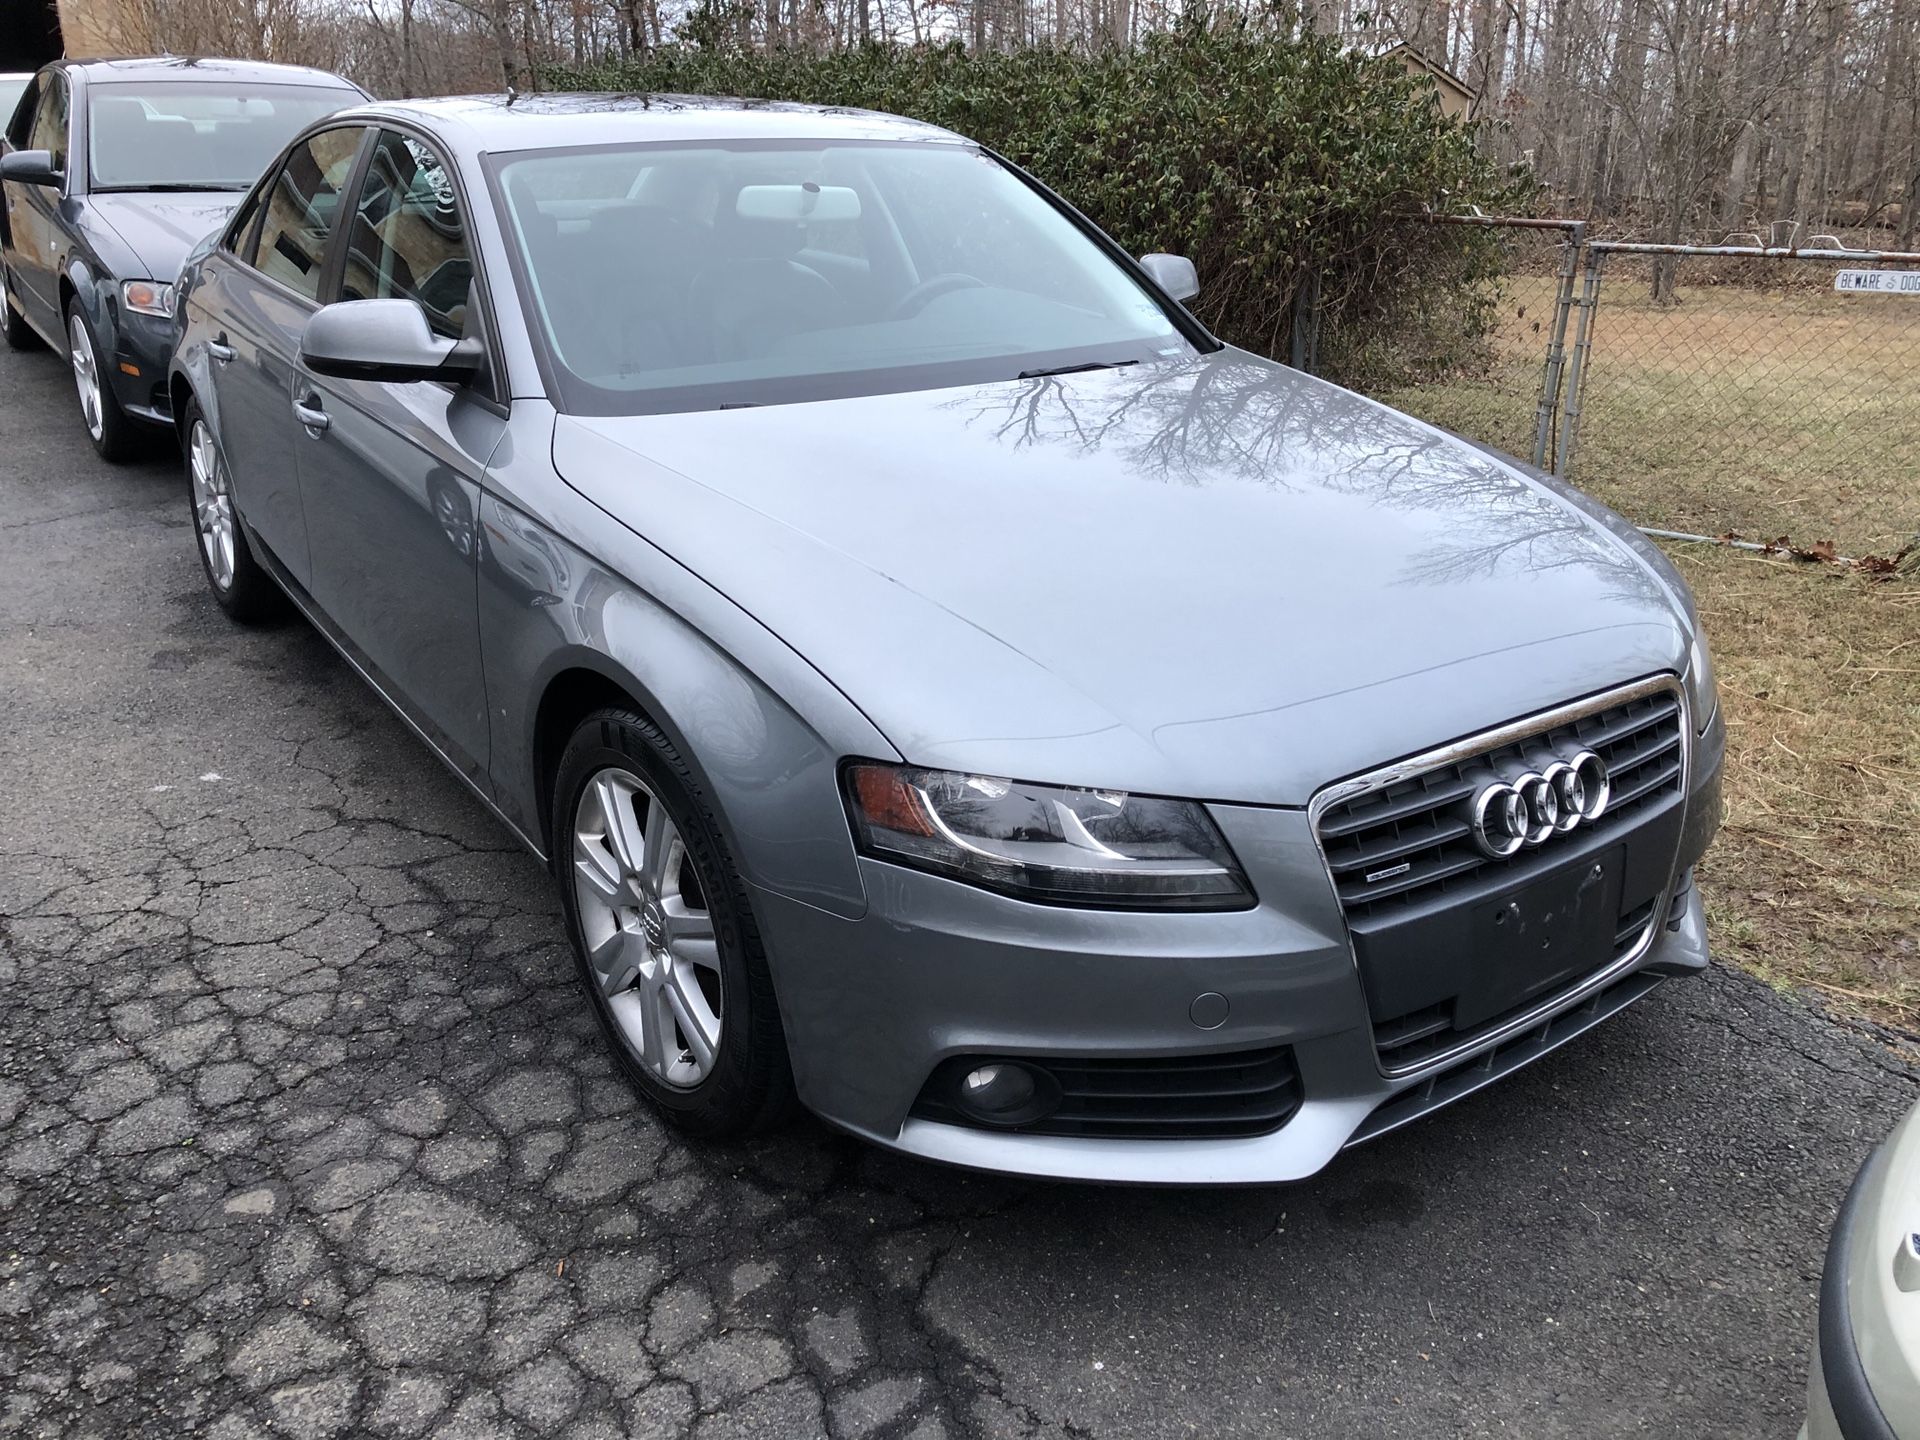 Audi A4, clean title and only 80k miles!